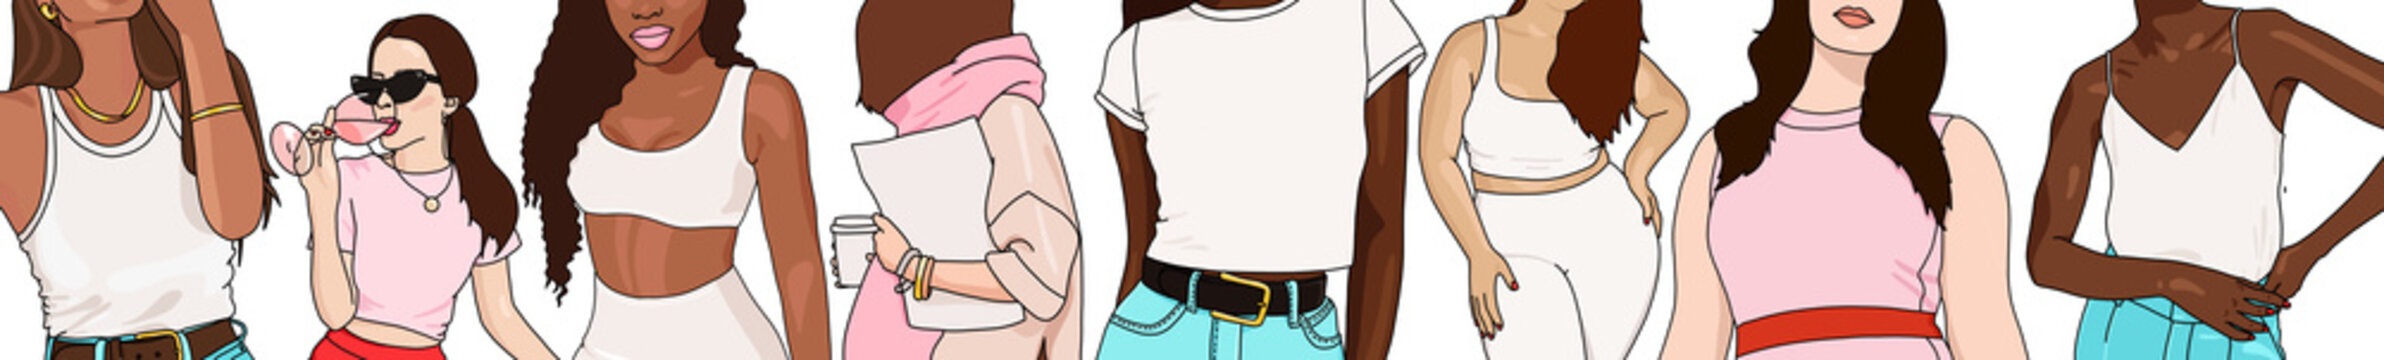 Illustration of diversity of women wearing different clothes with a variety of elements and skin colors